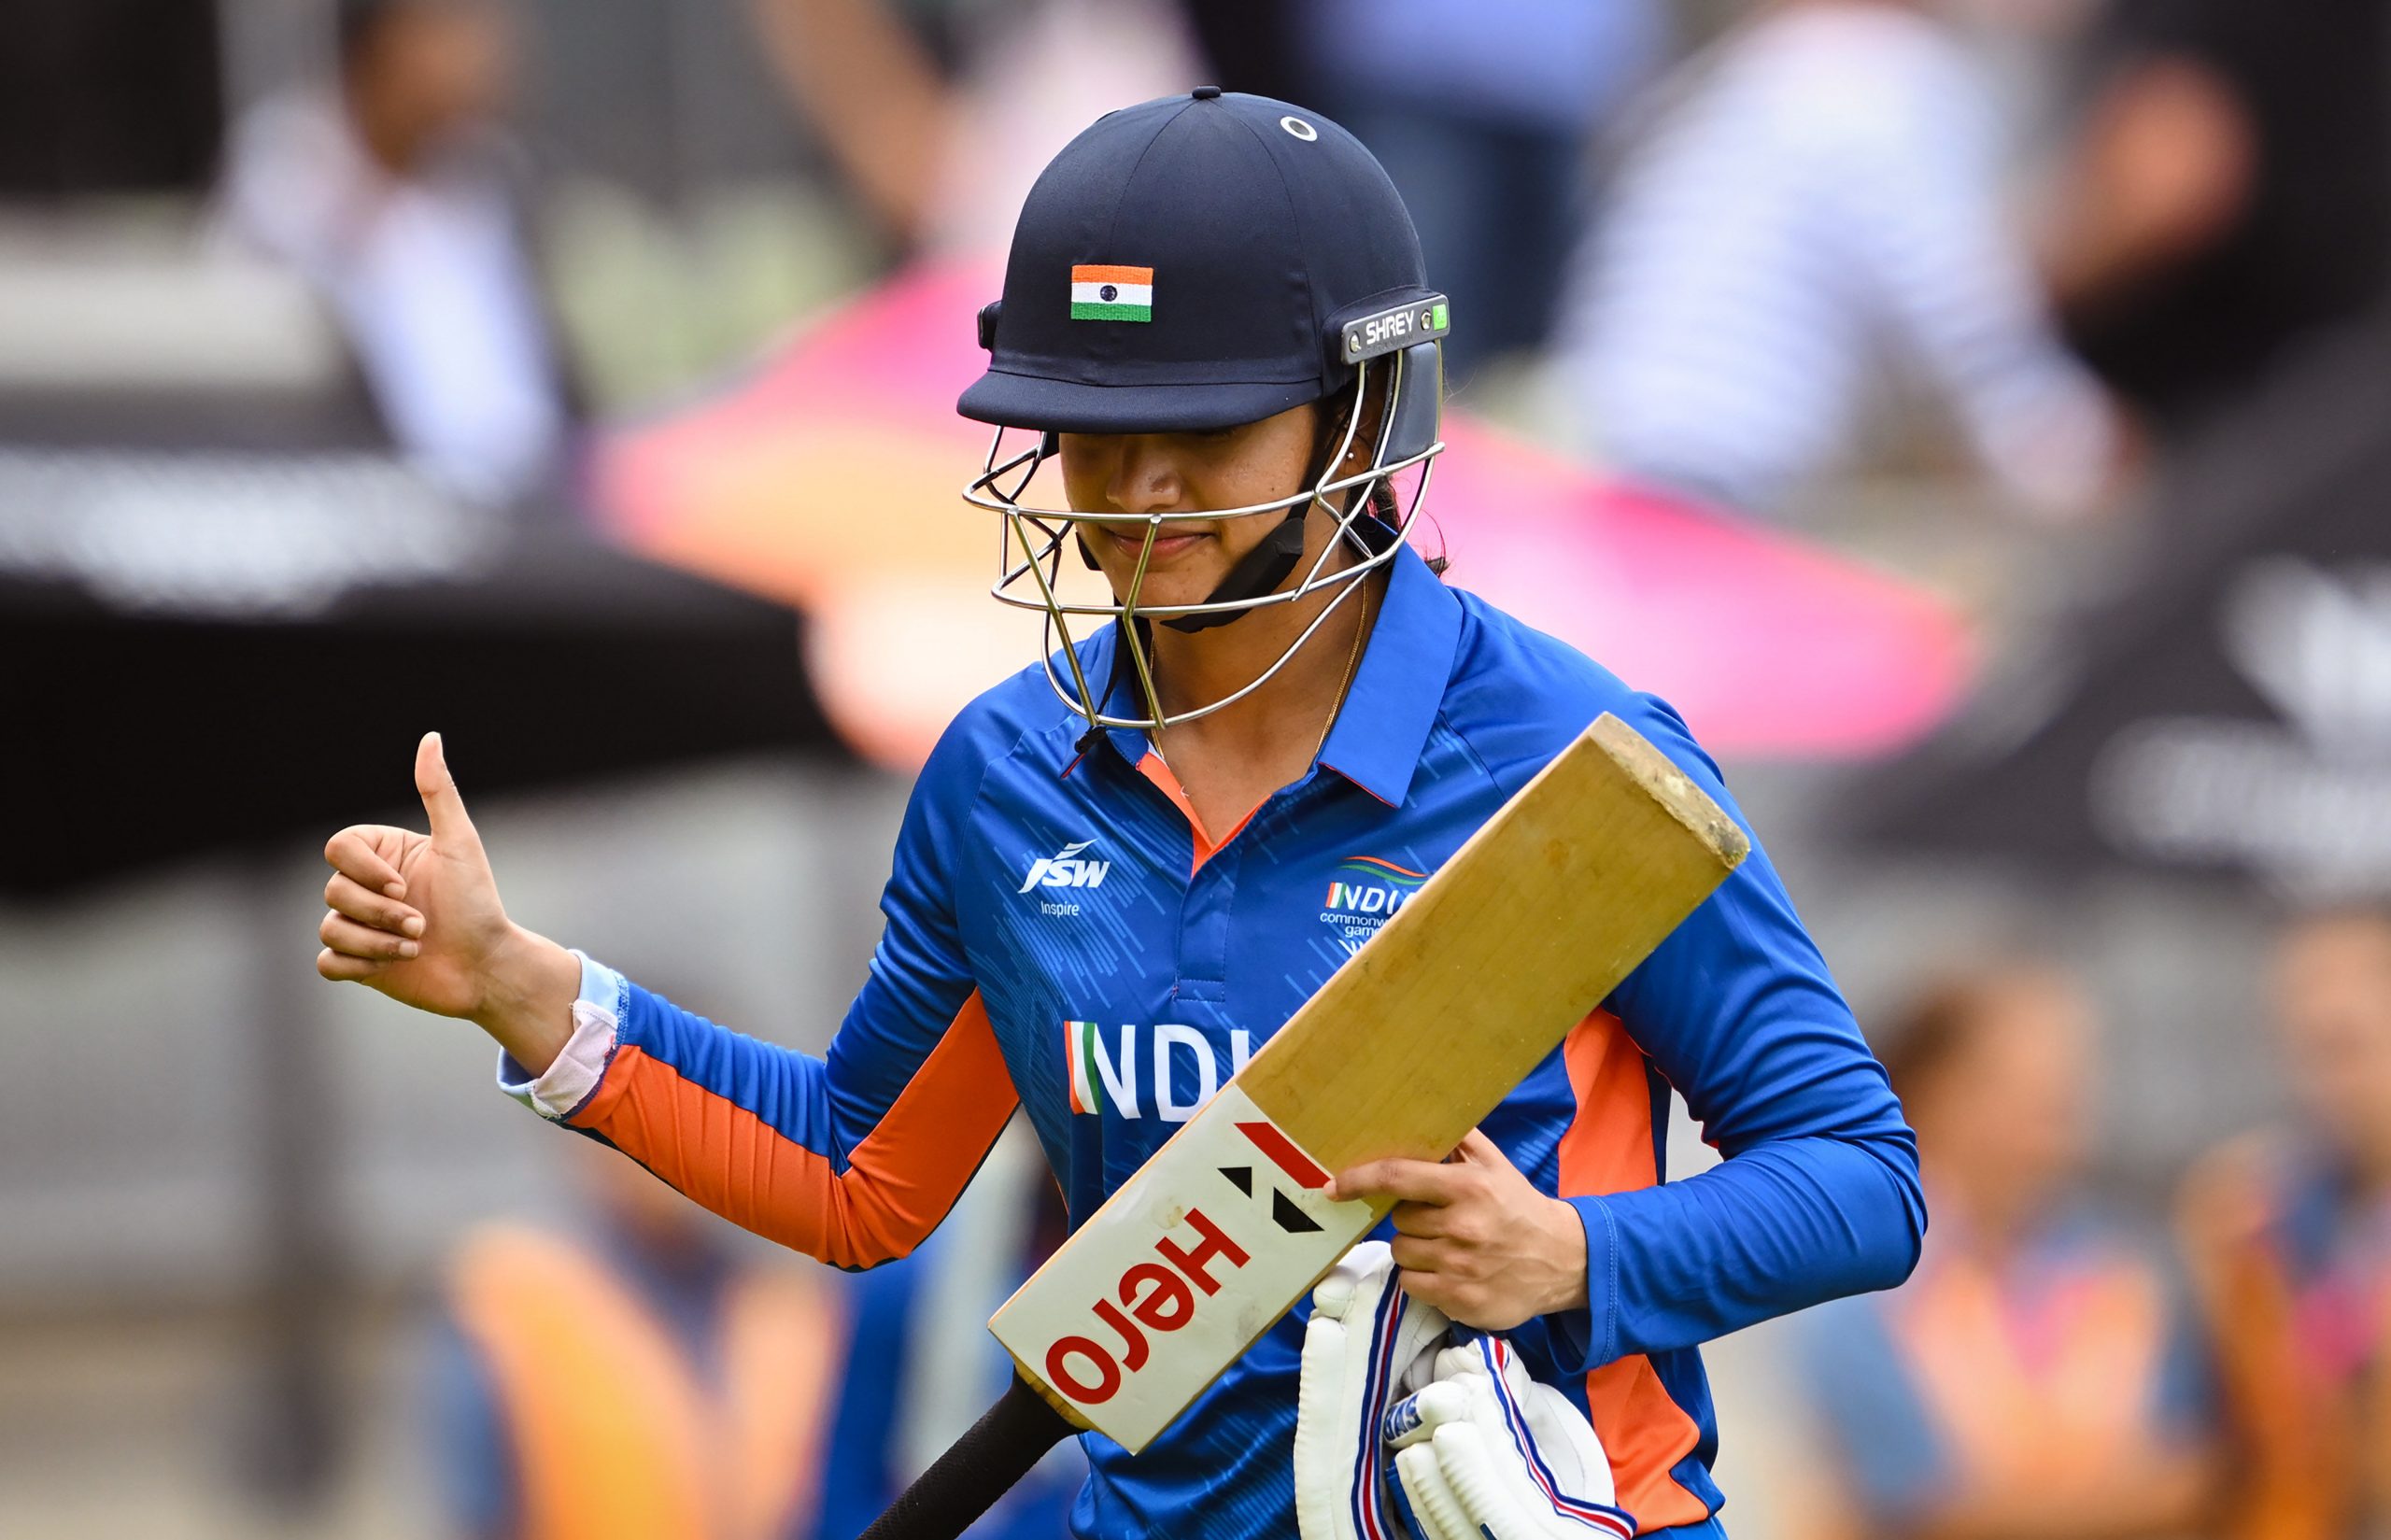 Smriti Mandhana opens up on first Commonwealth Games win, medal hopes